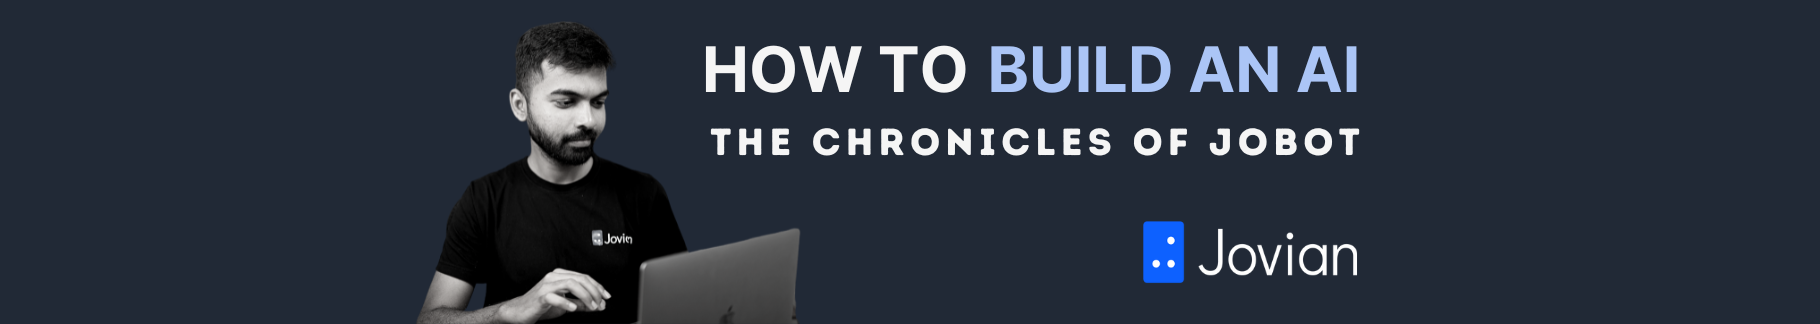 How to Build an AI: The Chronicles of Jobot